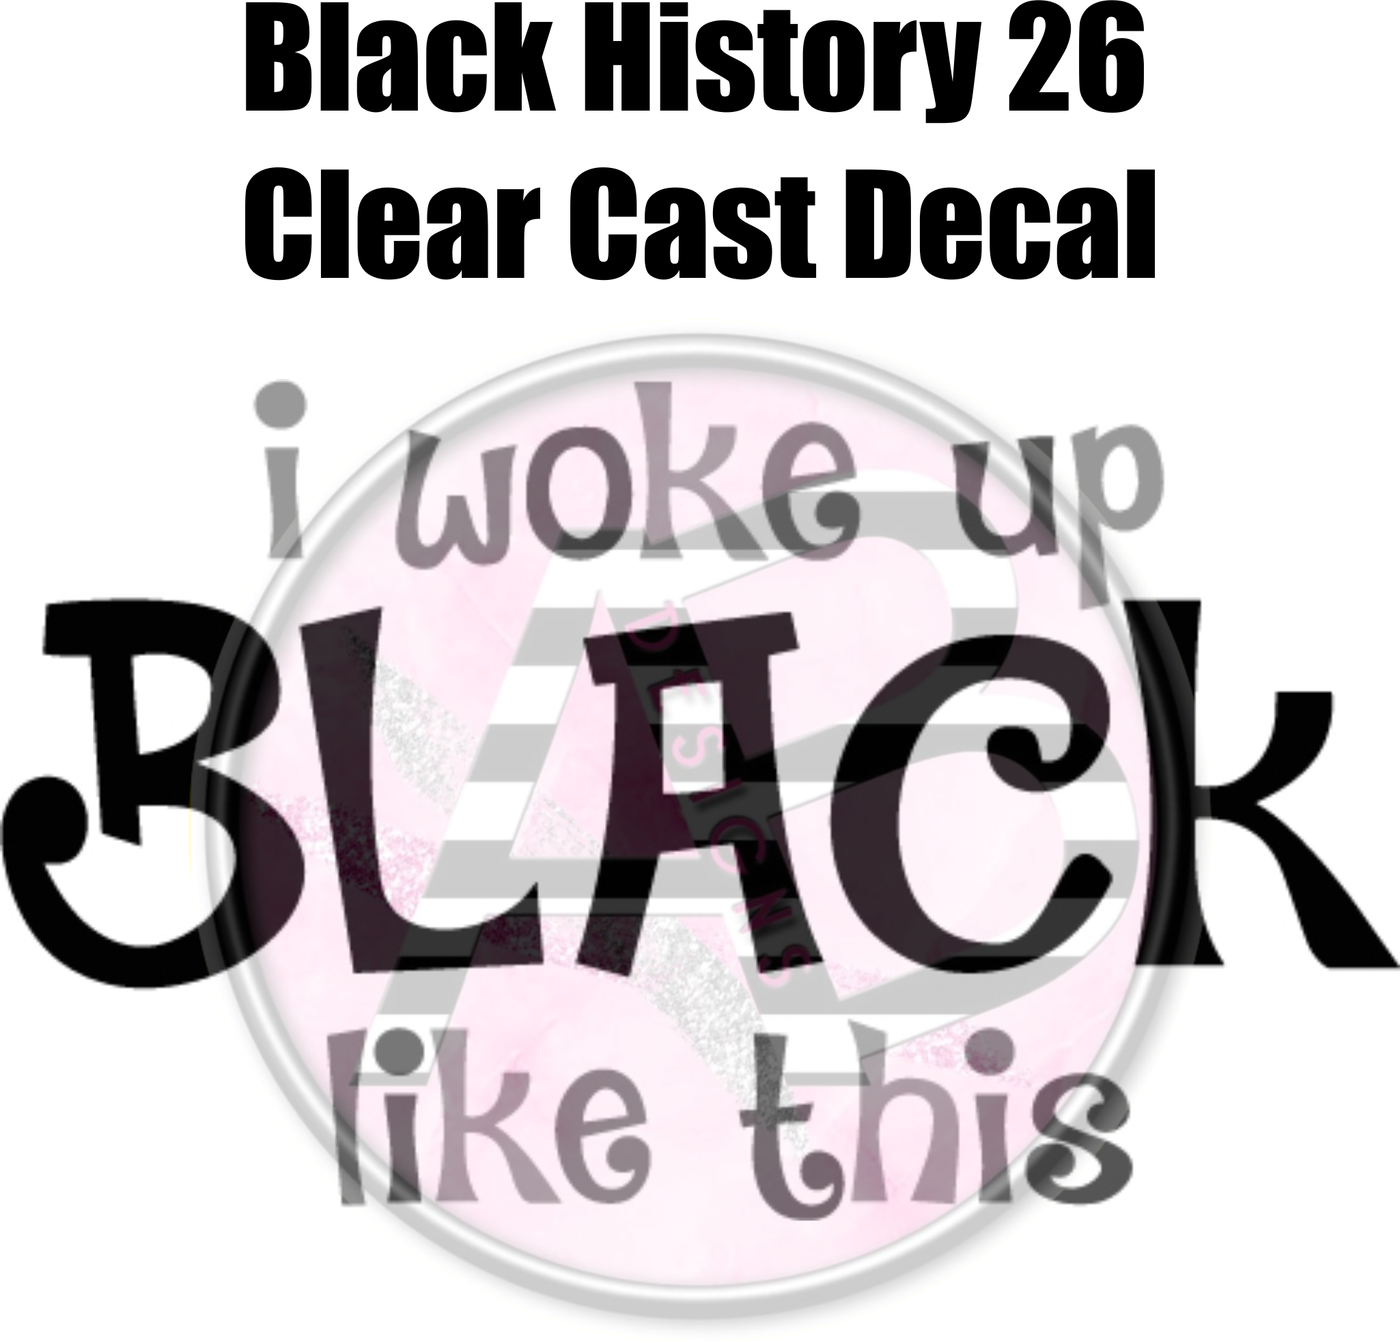 Black History 26 - Clear Cast Decal